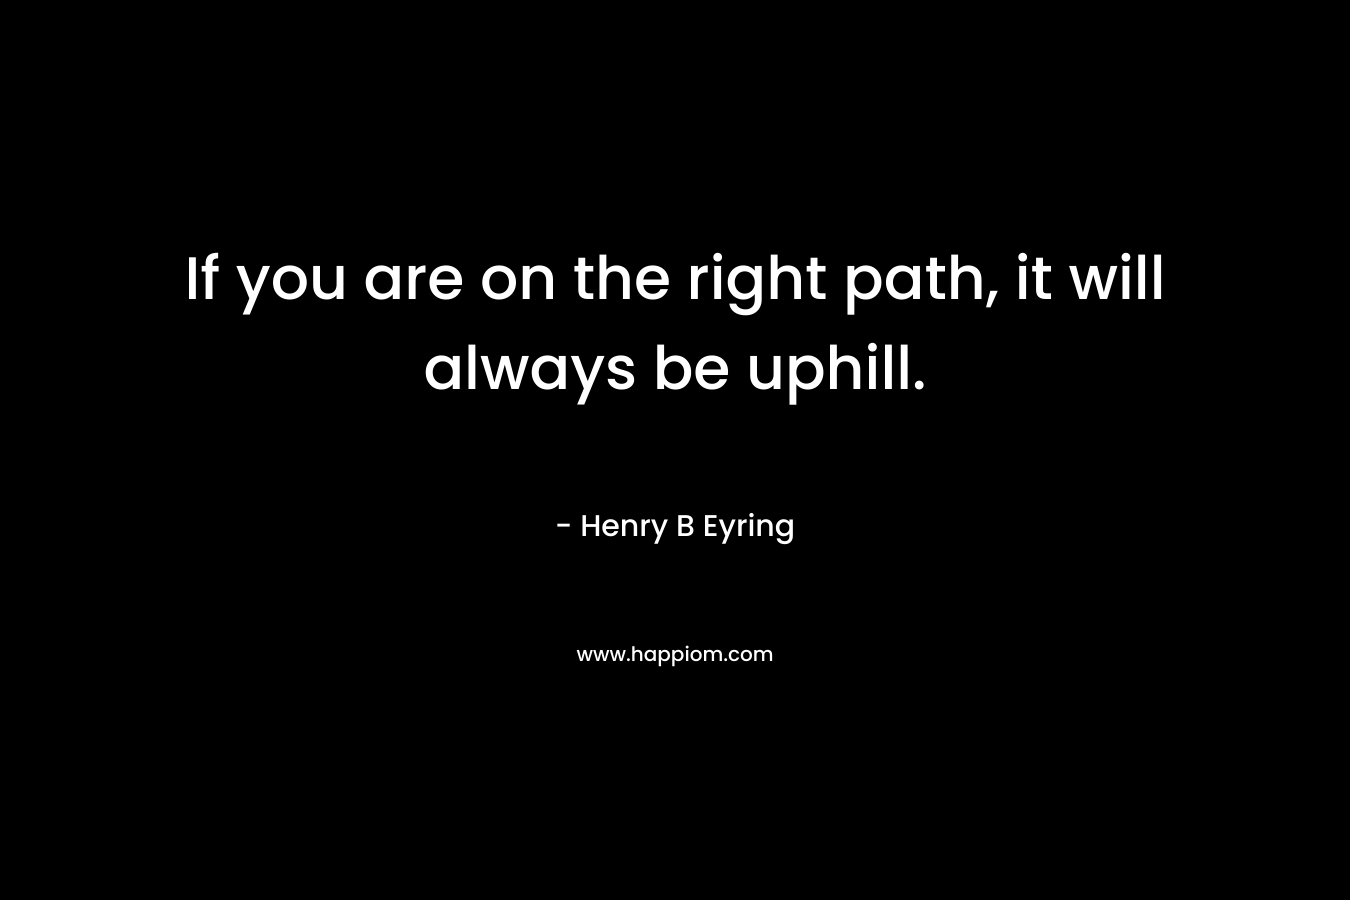 If you are on the right path, it will always be uphill.